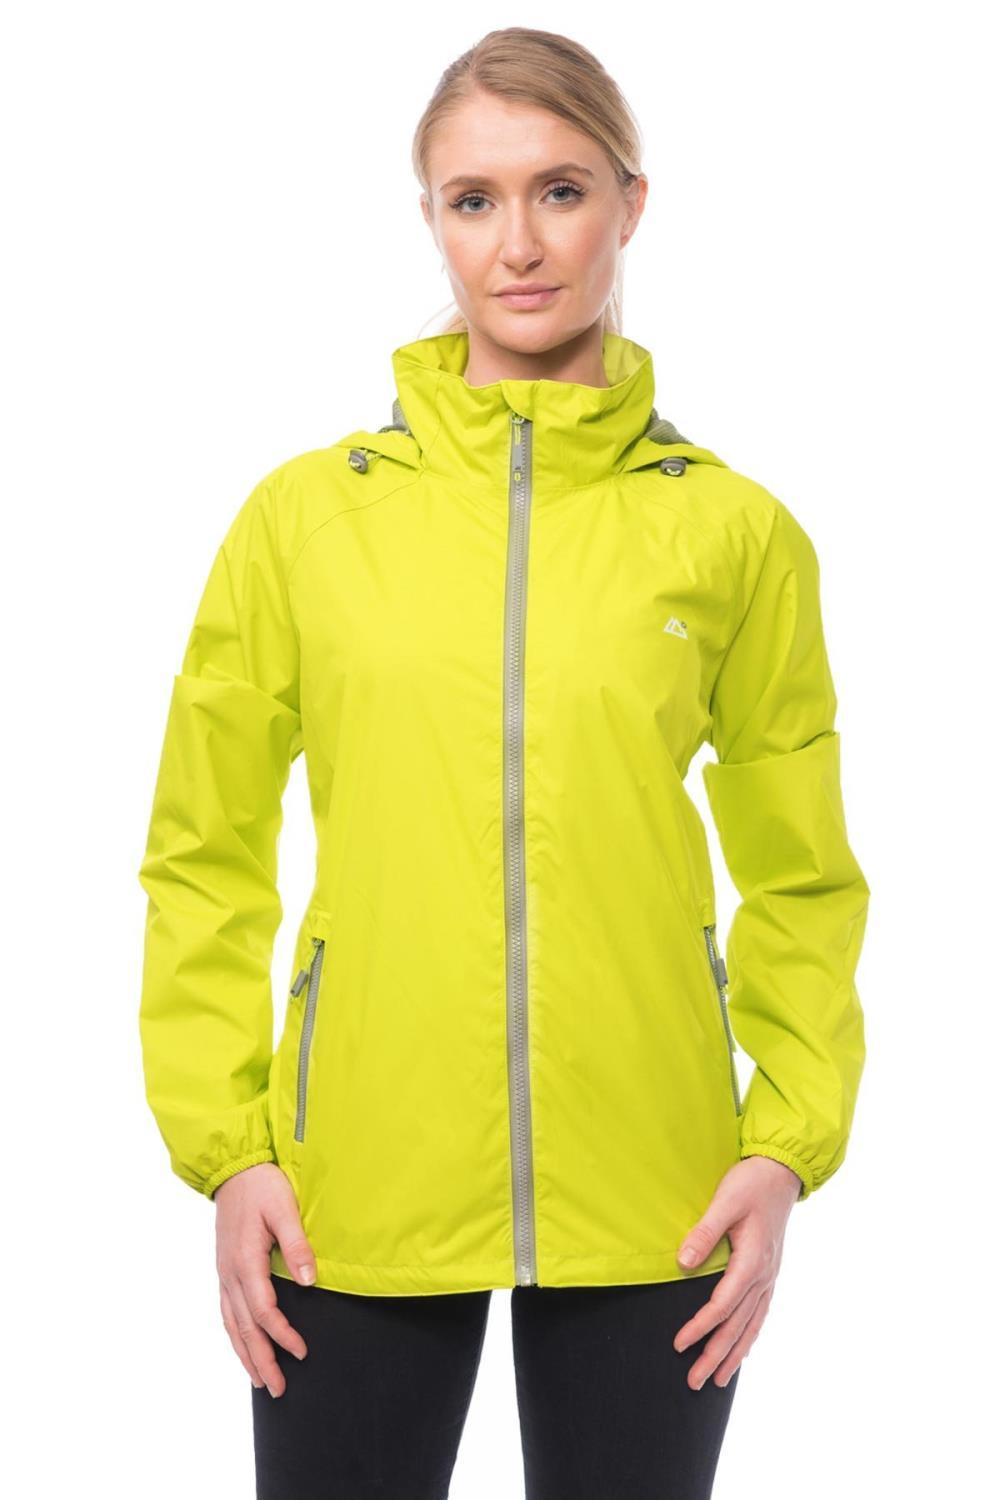 Buy Target Dry Evolve Ladies Green Jacket from Fane Valley Stores ...